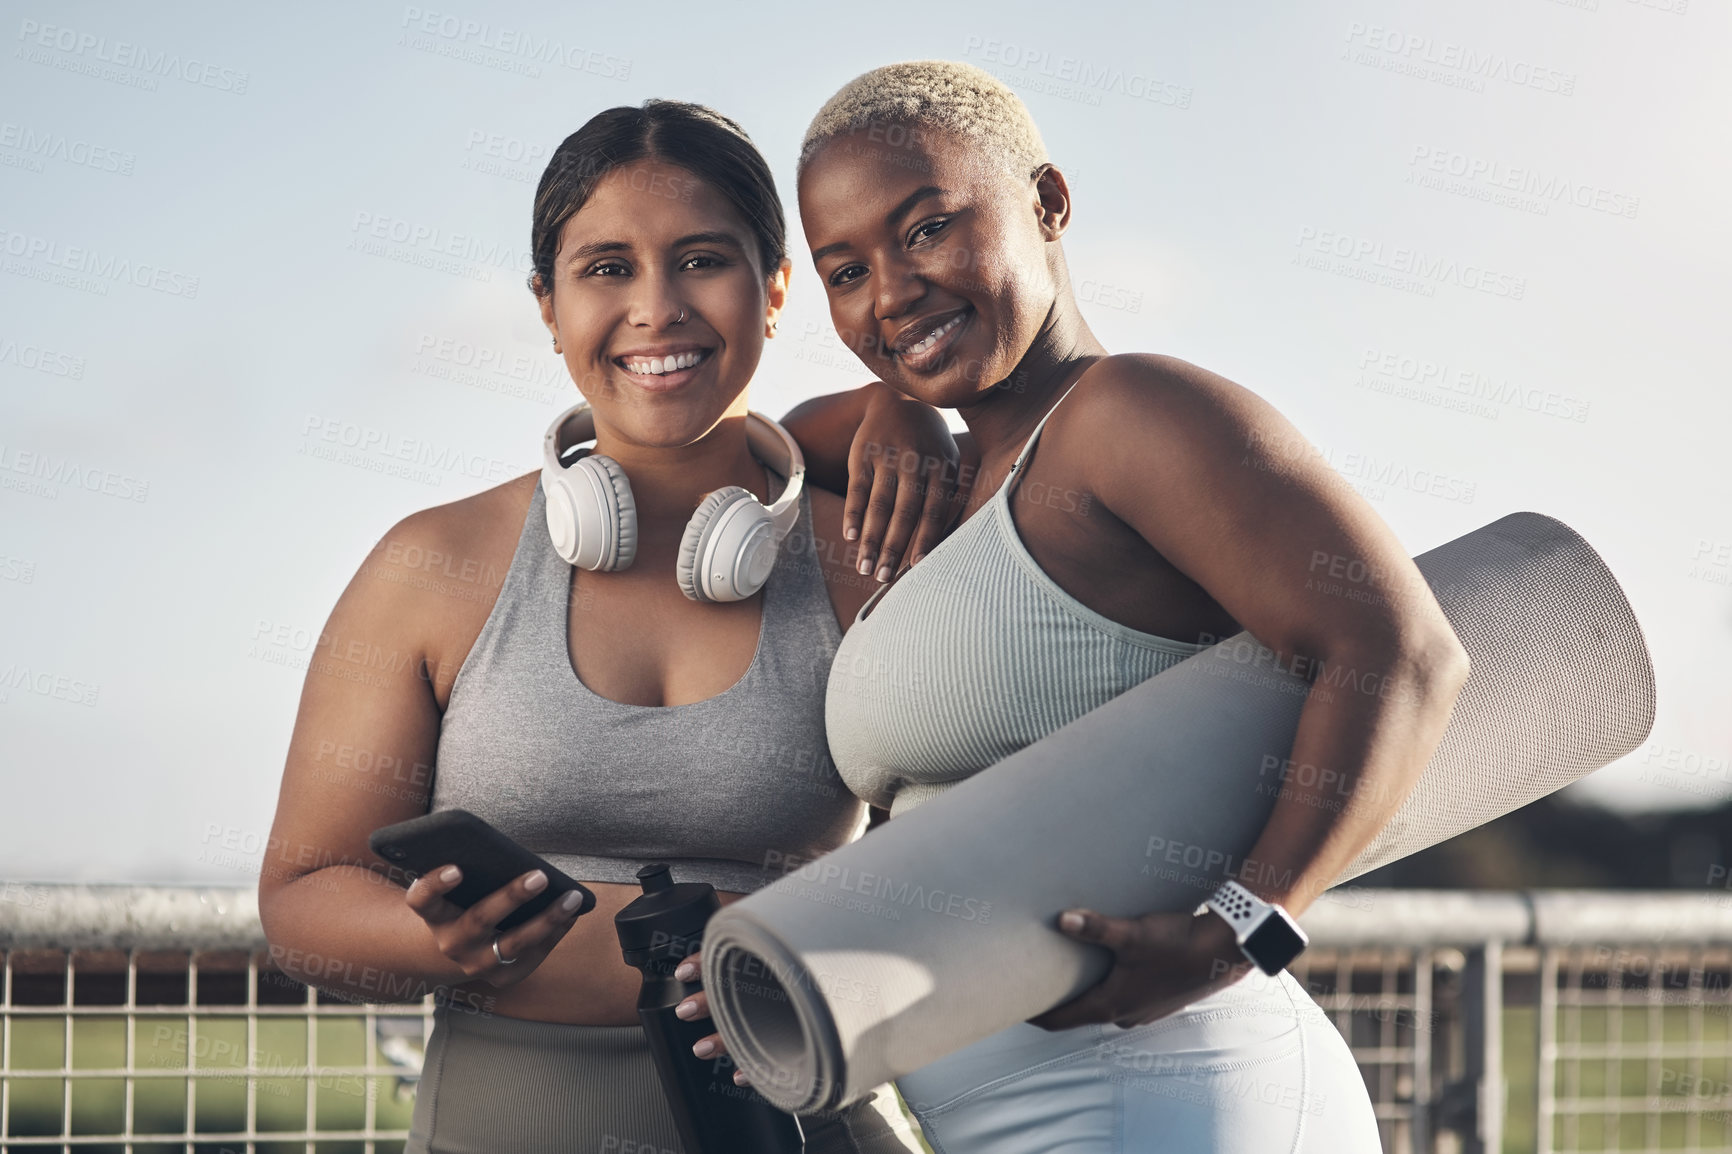 Buy stock photo Portrait of two friends out for a workout together